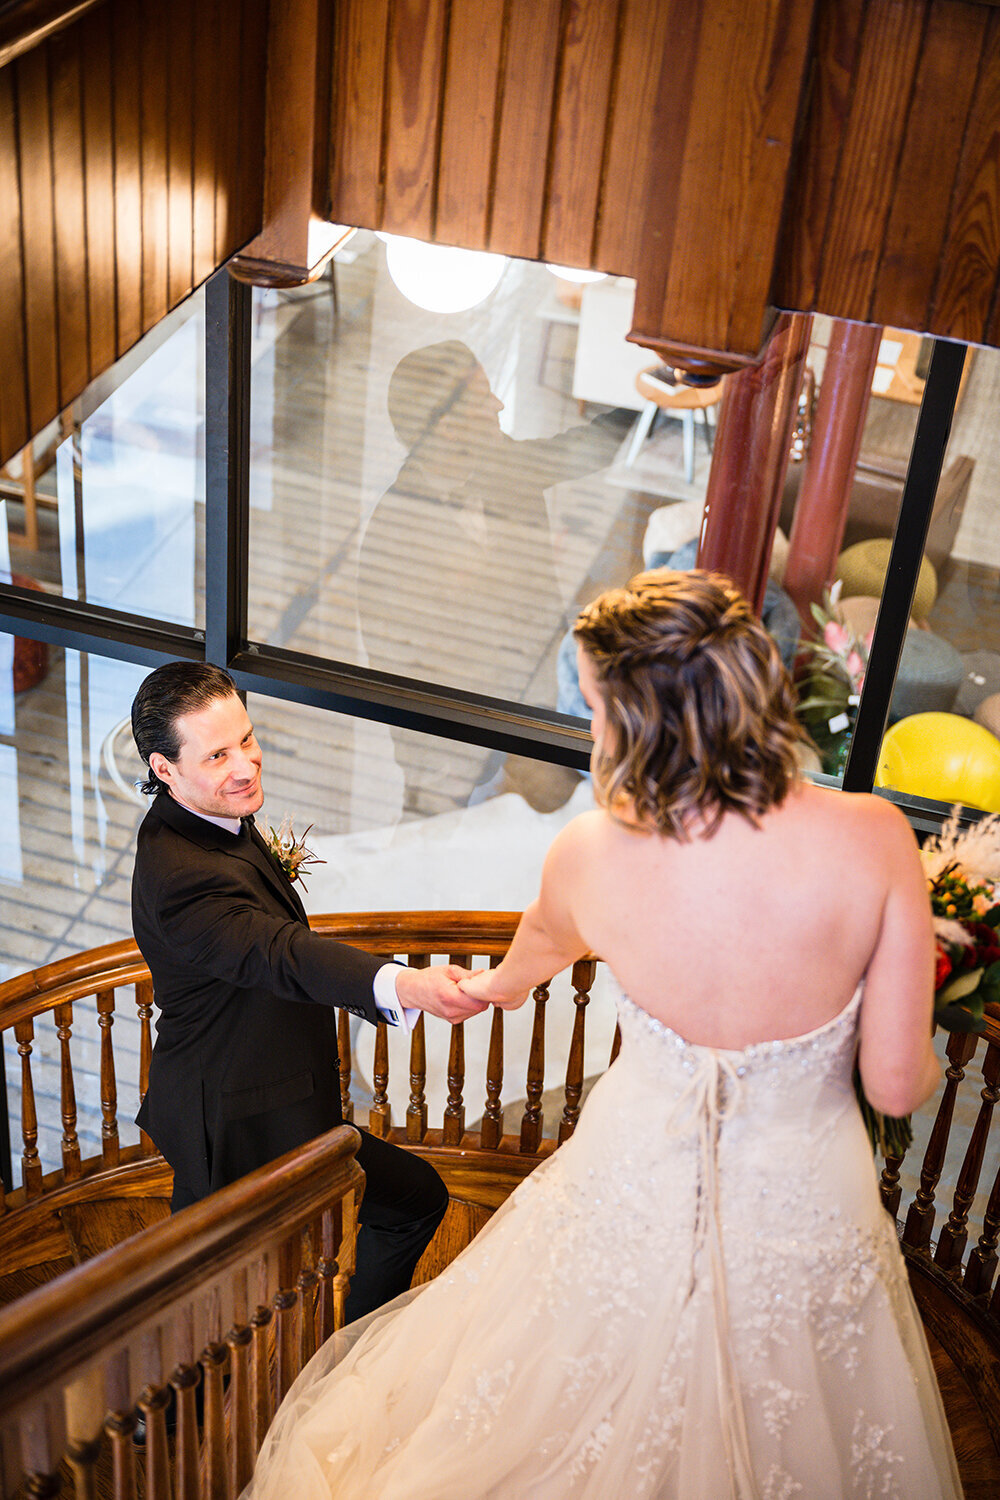 A groom reacts warmly to seeing his partner during their first look and reaches for her hand on an antique stairwell in the Fire Station One hotel in Roanoke, Virginia.